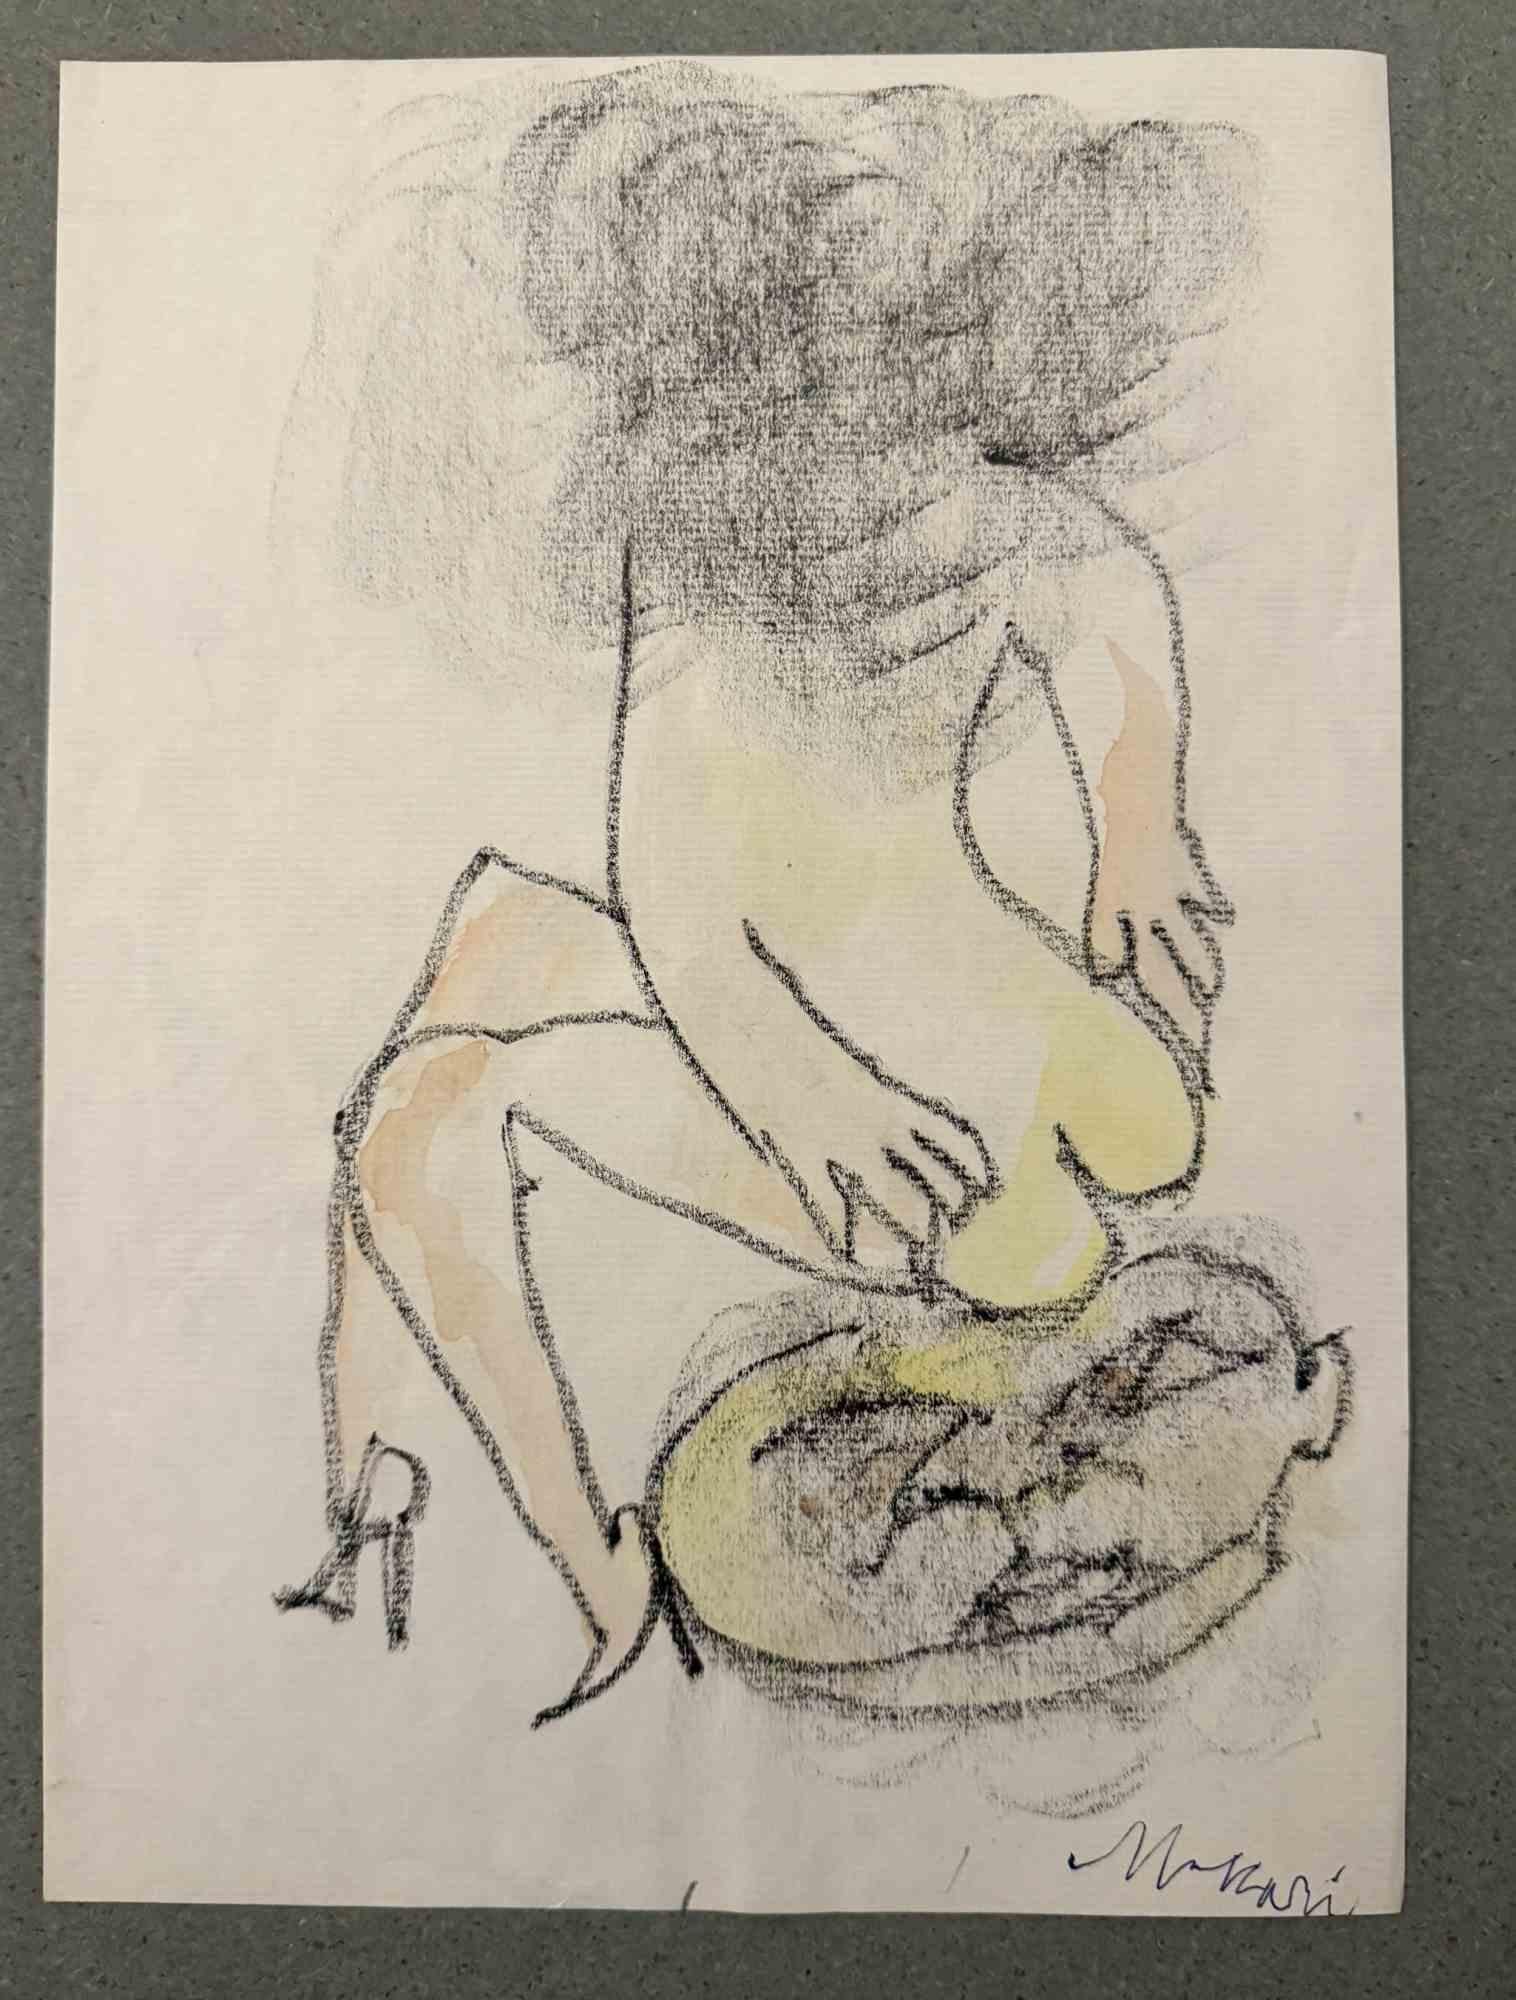 Sitting is a charcoal drawing realized by Mino Maccari  (1924-1989) in the Mid-20th Century.

Hand-signed.

Good conditions with slight foxing.

Mino Maccari (Siena, 1924-Rome, June 16, 1989) was an Italian writer, painter, engraver and journalist,